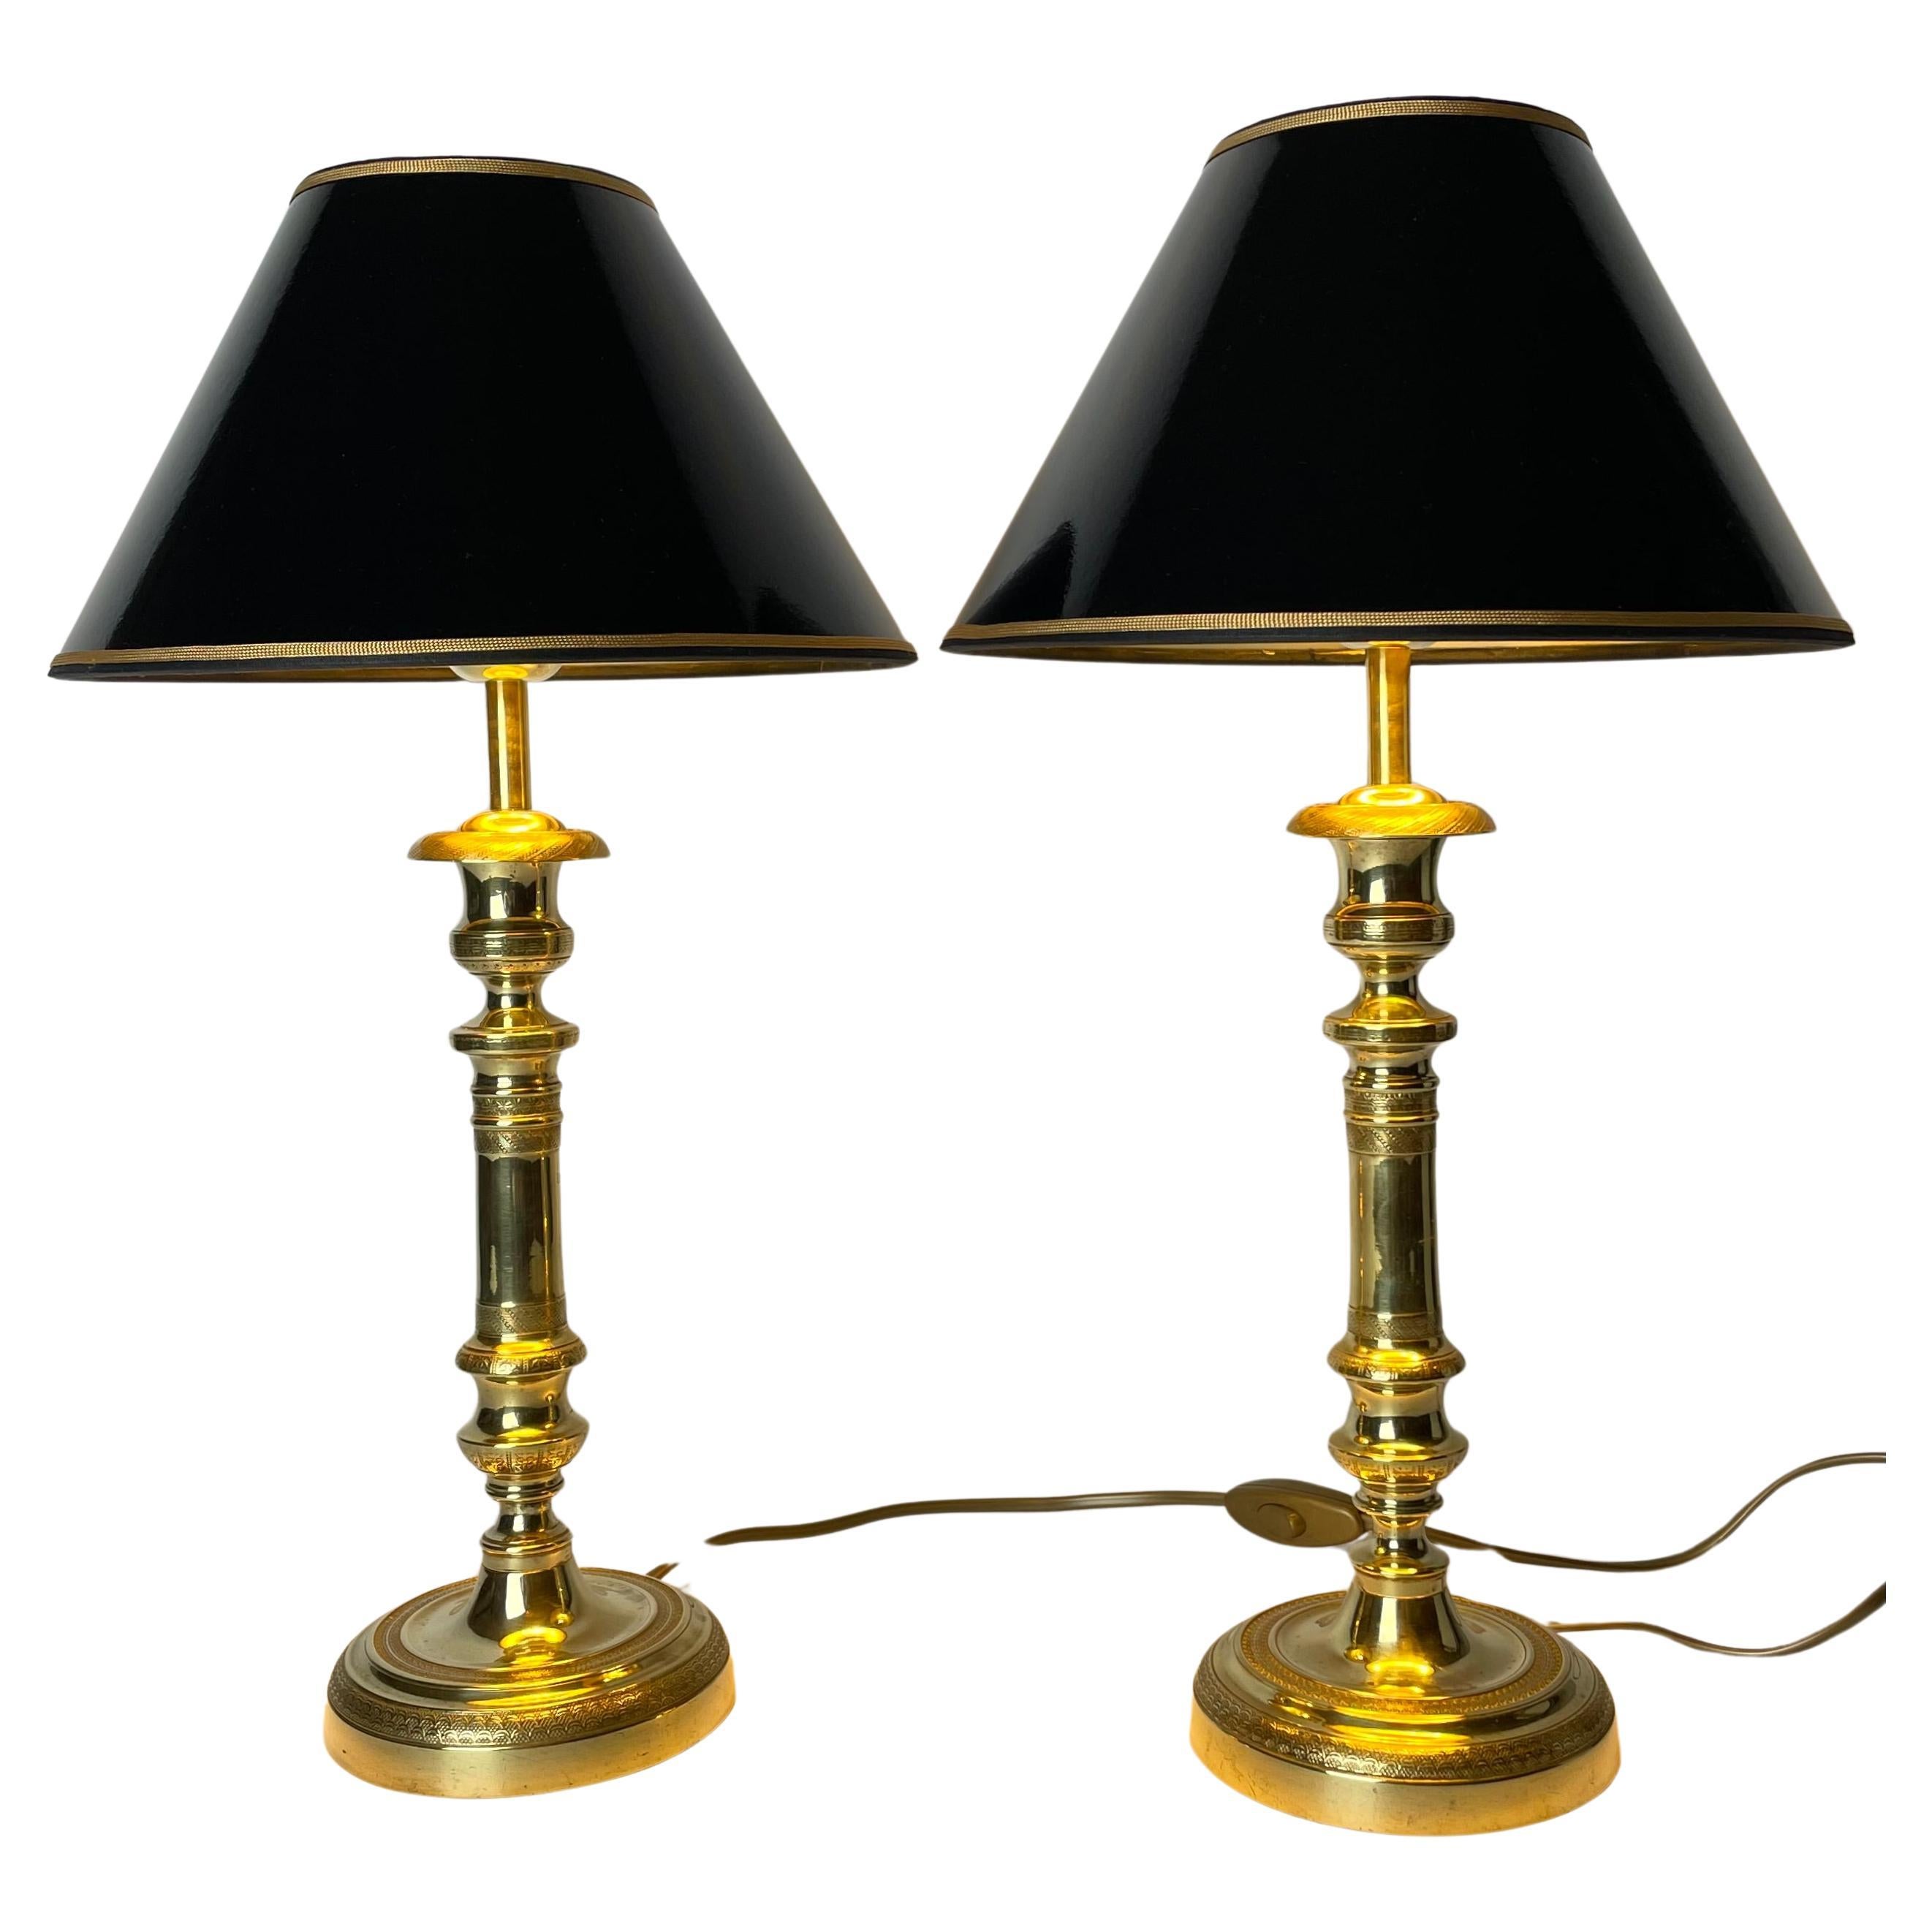 Elegant pair of Empire Table Lamps, originally candlesticks from the 1820s For Sale